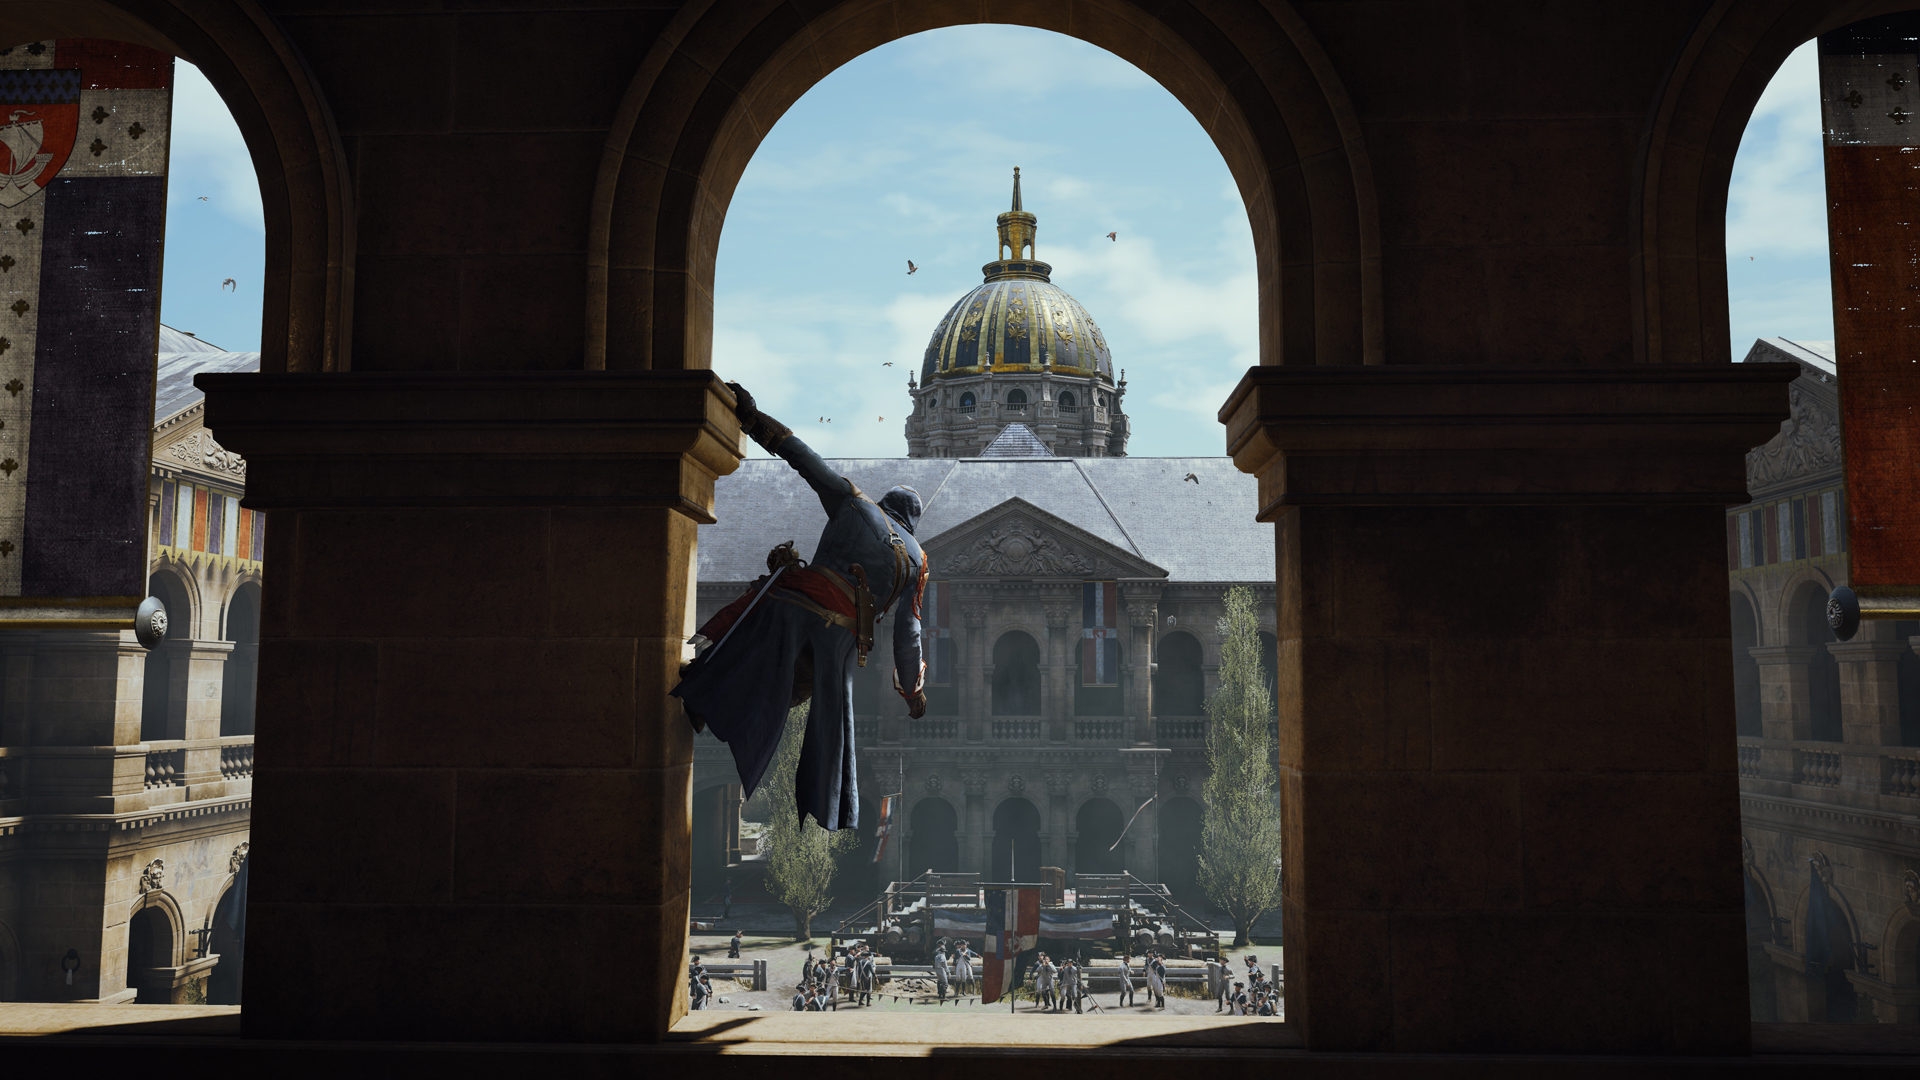 Assassin's Creed Unity runs at 900p 30fps on Xbox One and PS4